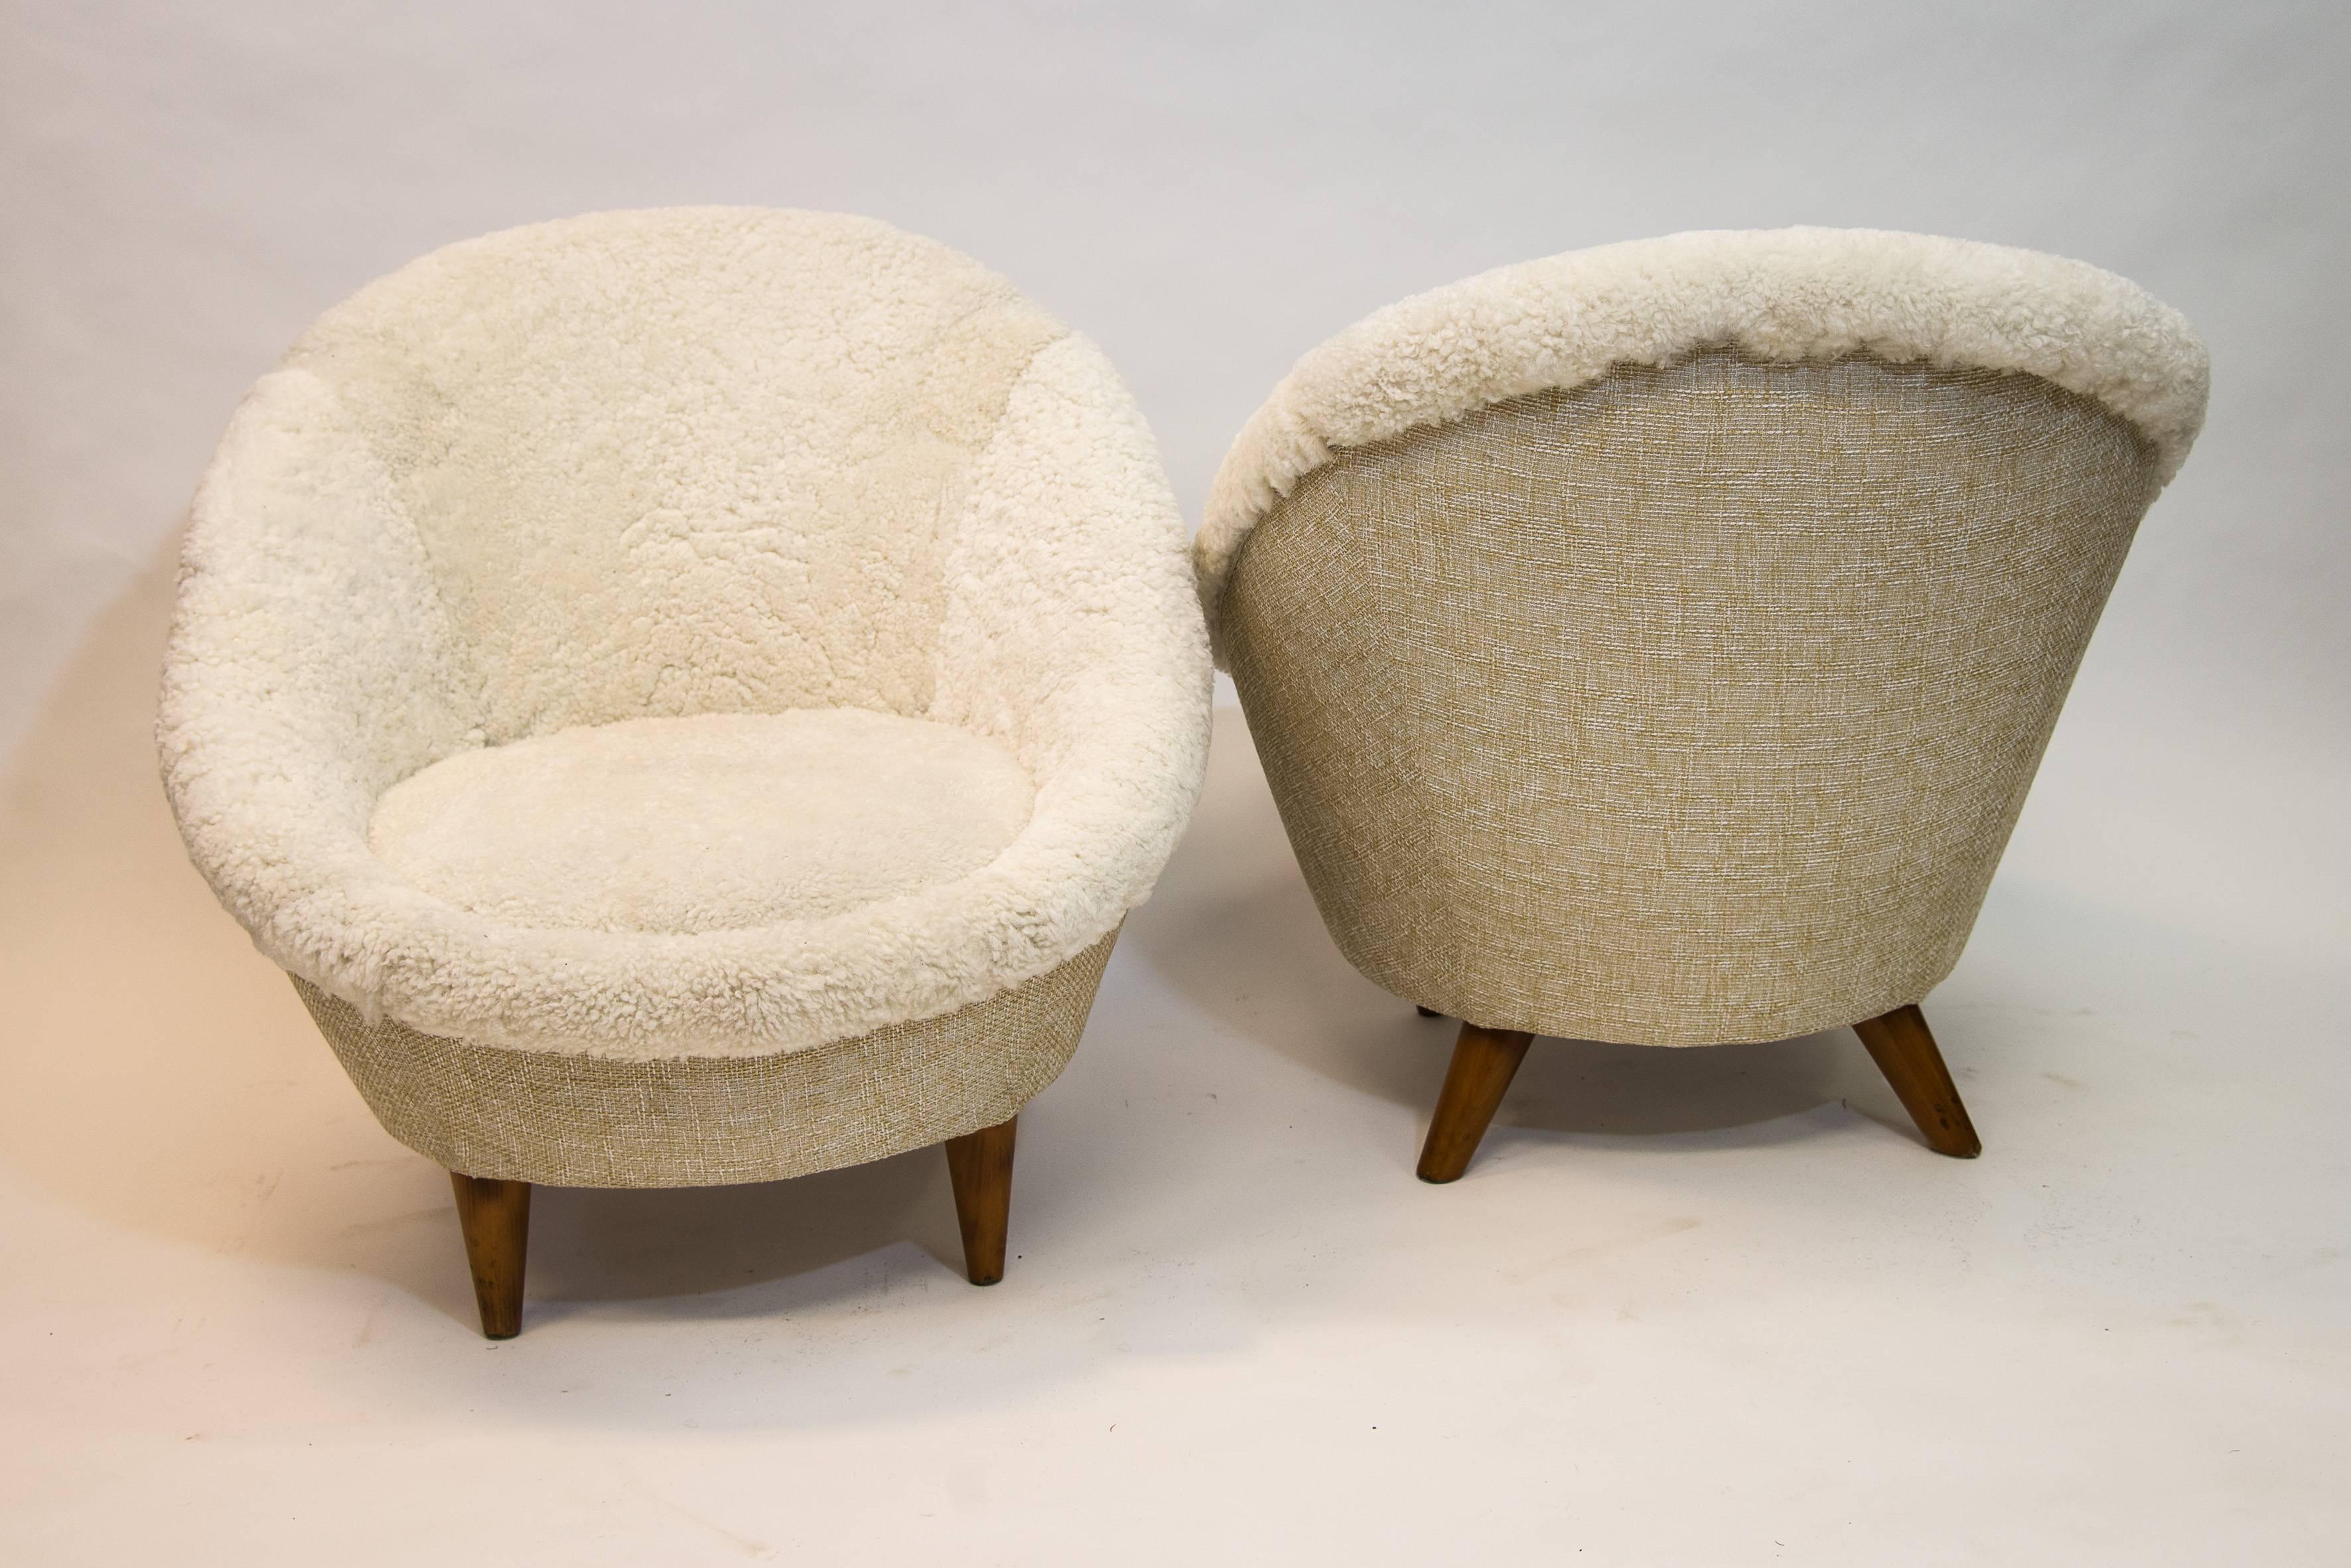 These Florida chairs have a later real white sheep wool upholstry. The Florida chairs were produced between 1954 and 1955. With its seat shape like a tub they are very unique. With wooden teak legs.